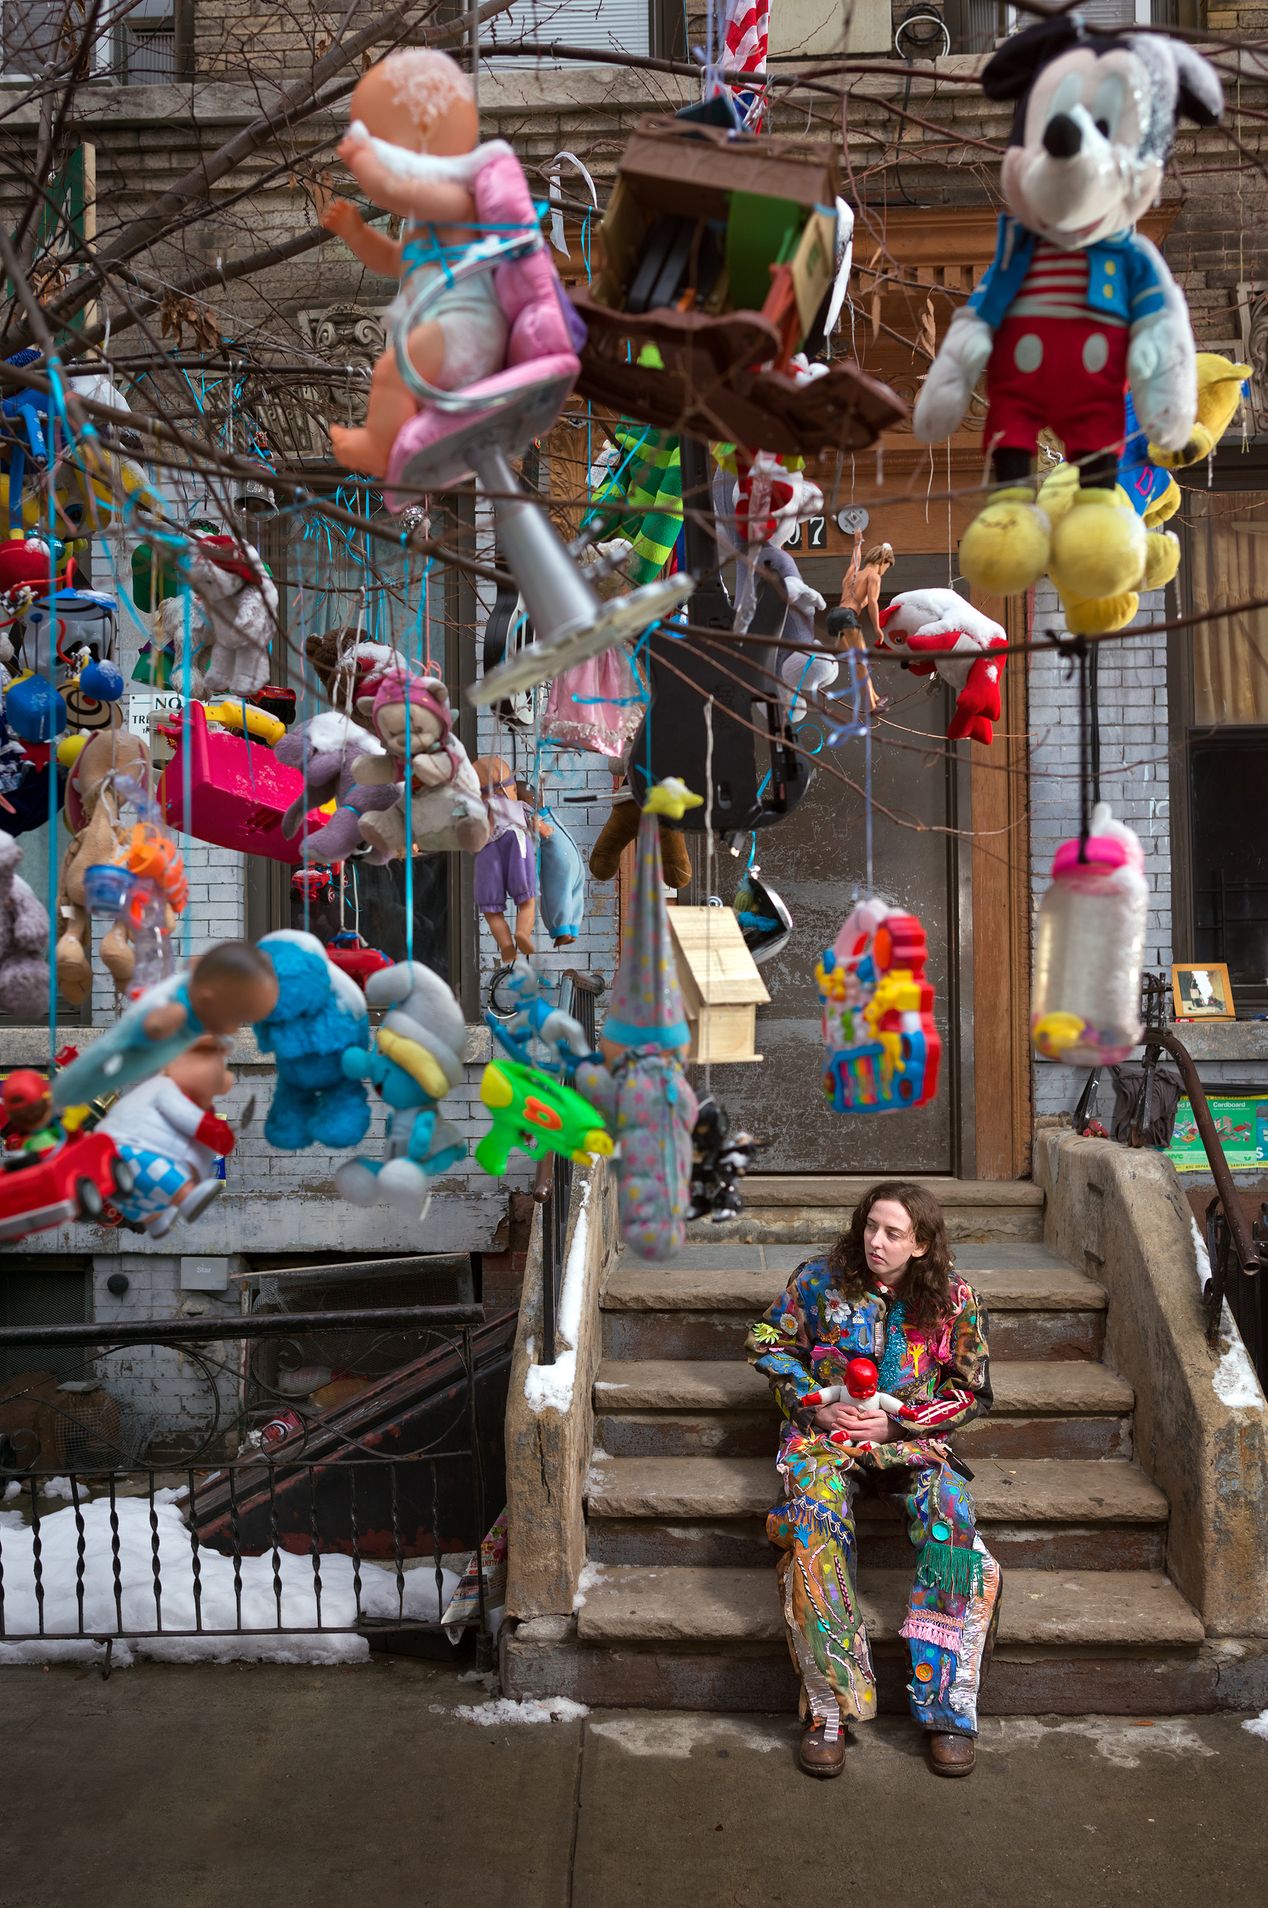 Woman sitting on steps next to a tree decorated with toys, editorial photography, Ilona Szwarc, Los Angeles portrait photographer.